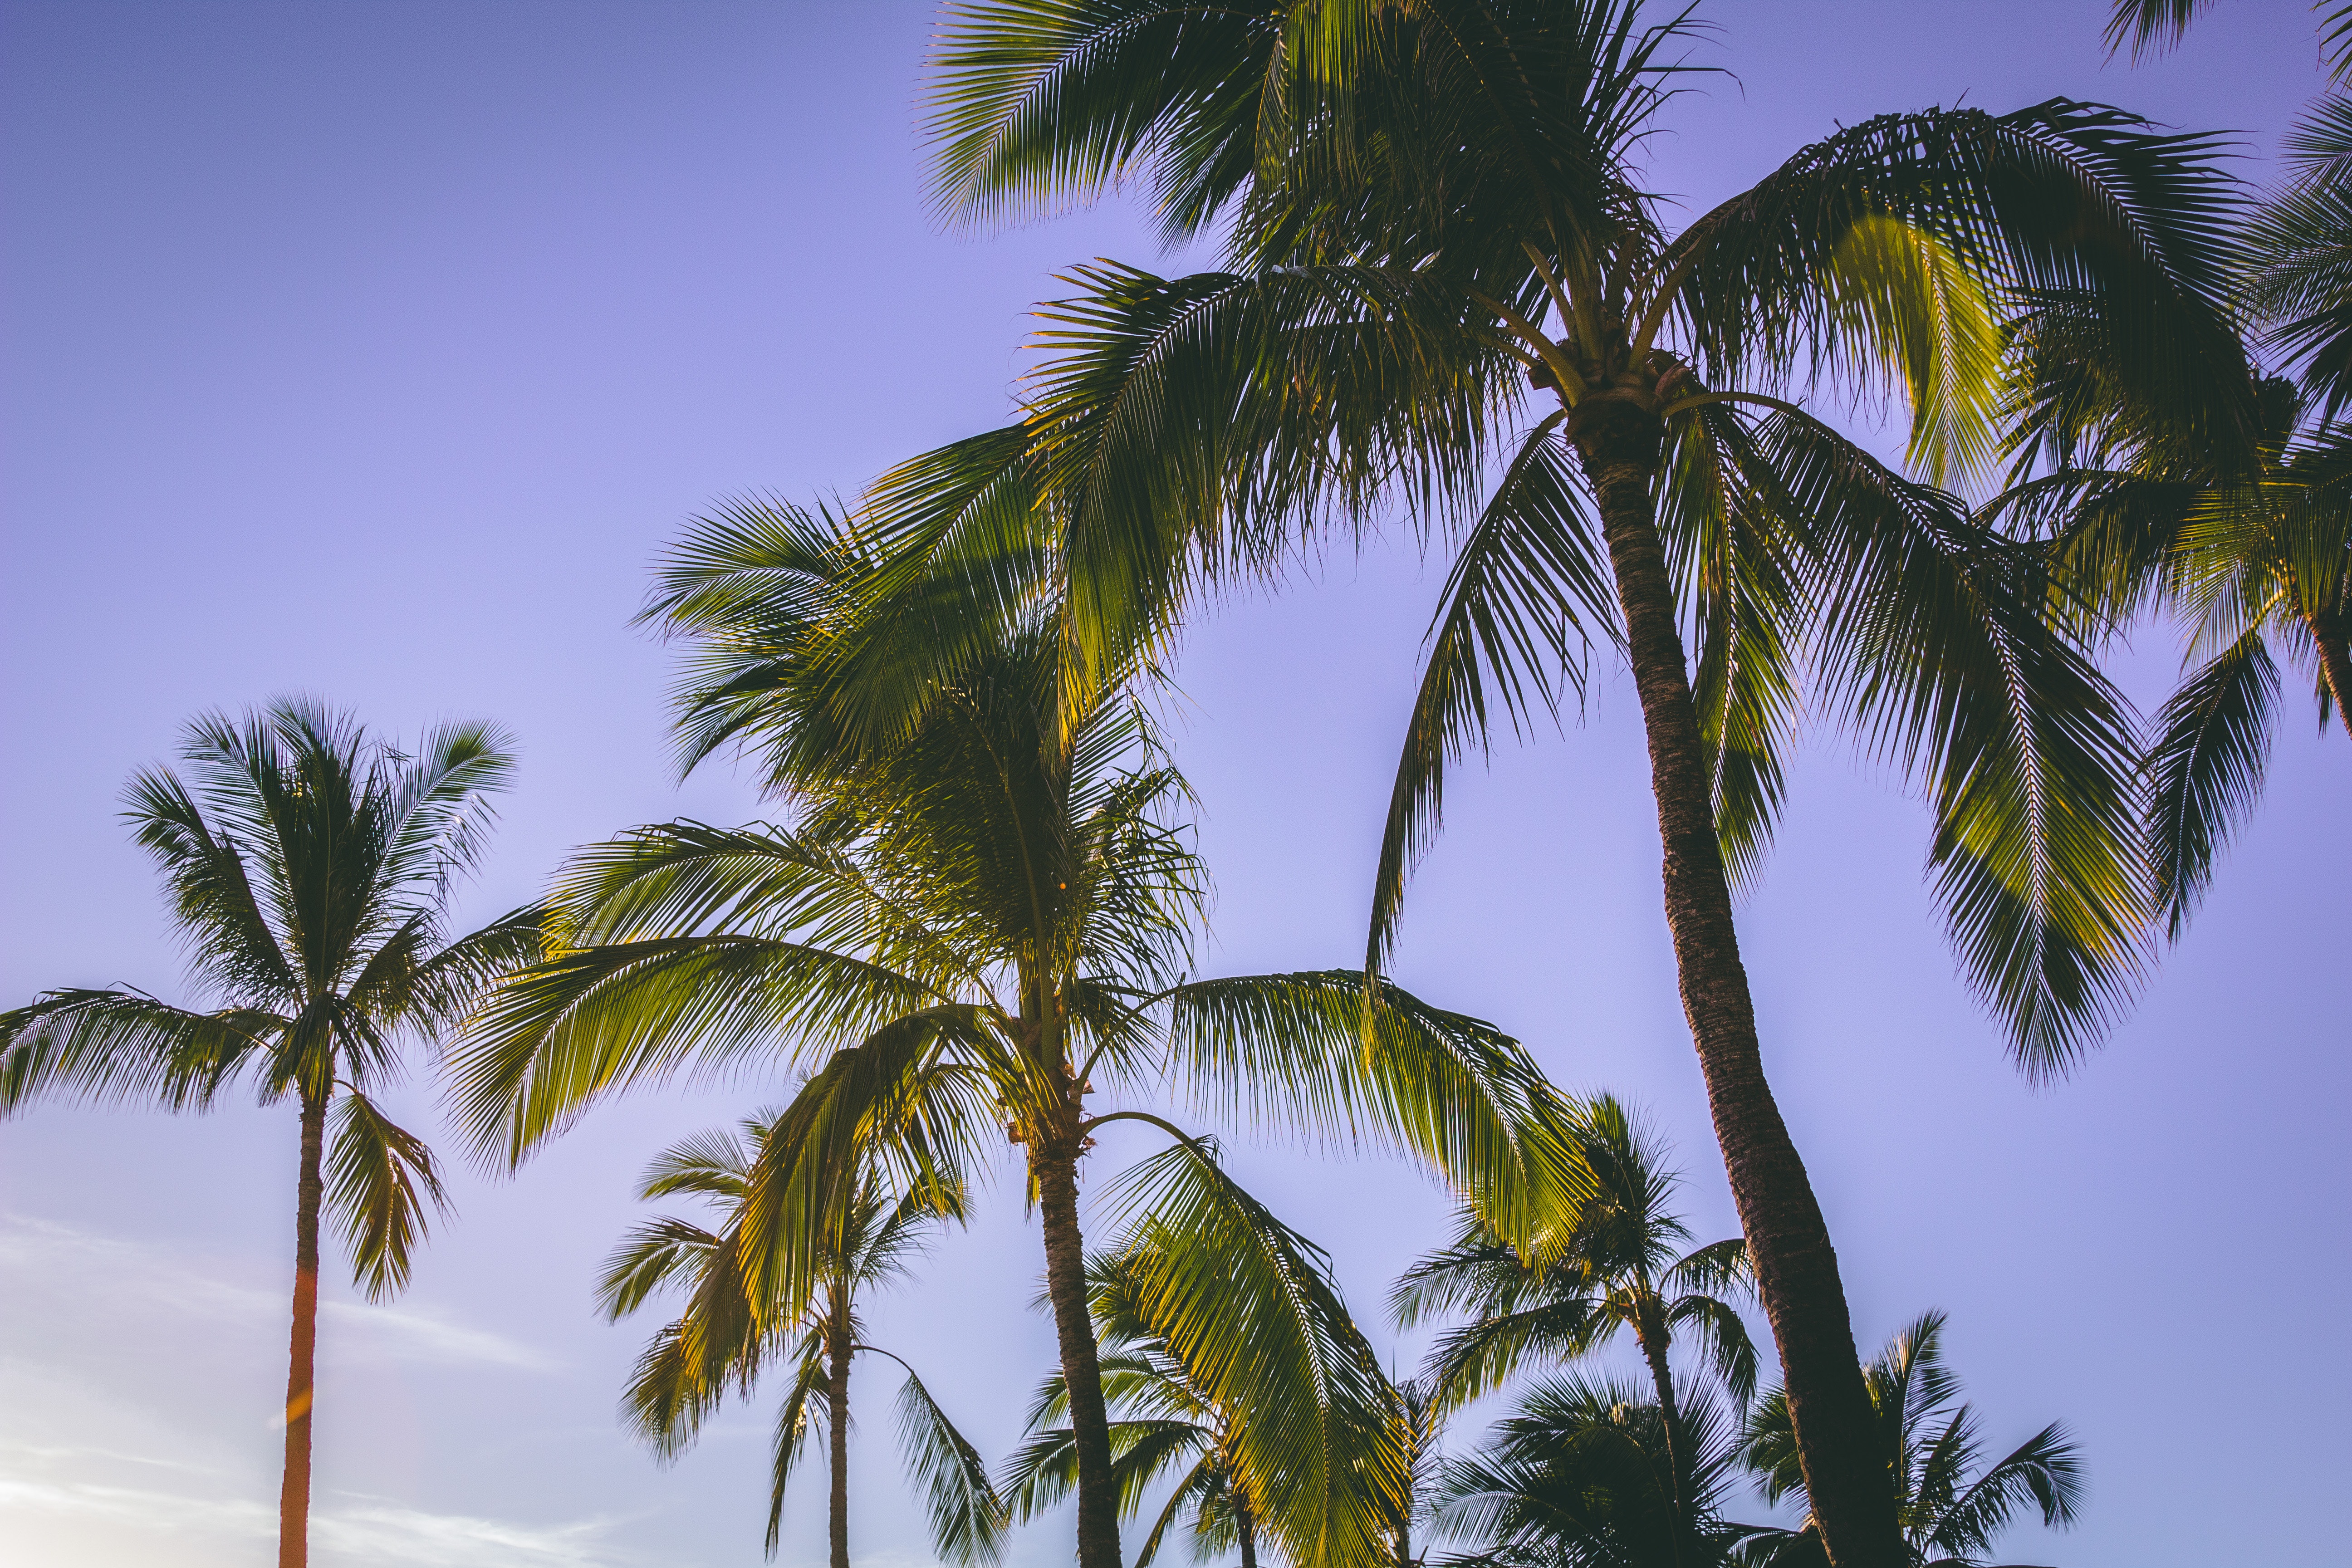 This view of palms is something you should get used to after moving to South Florida.